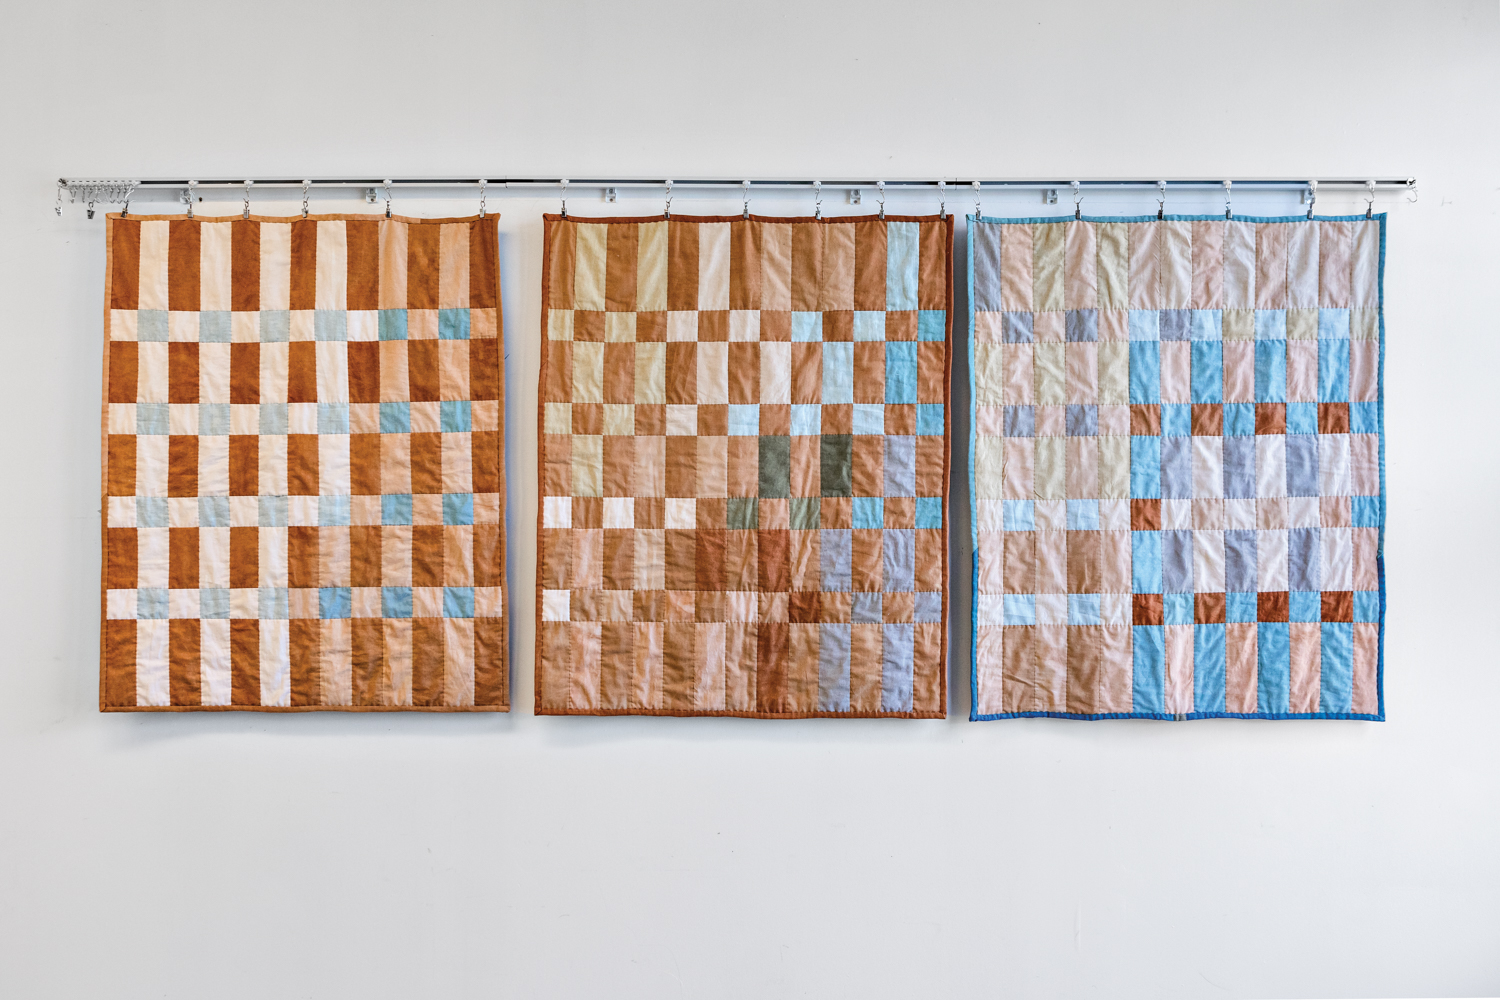 3 of Alison Charli Smith's quilts hanging on the wall